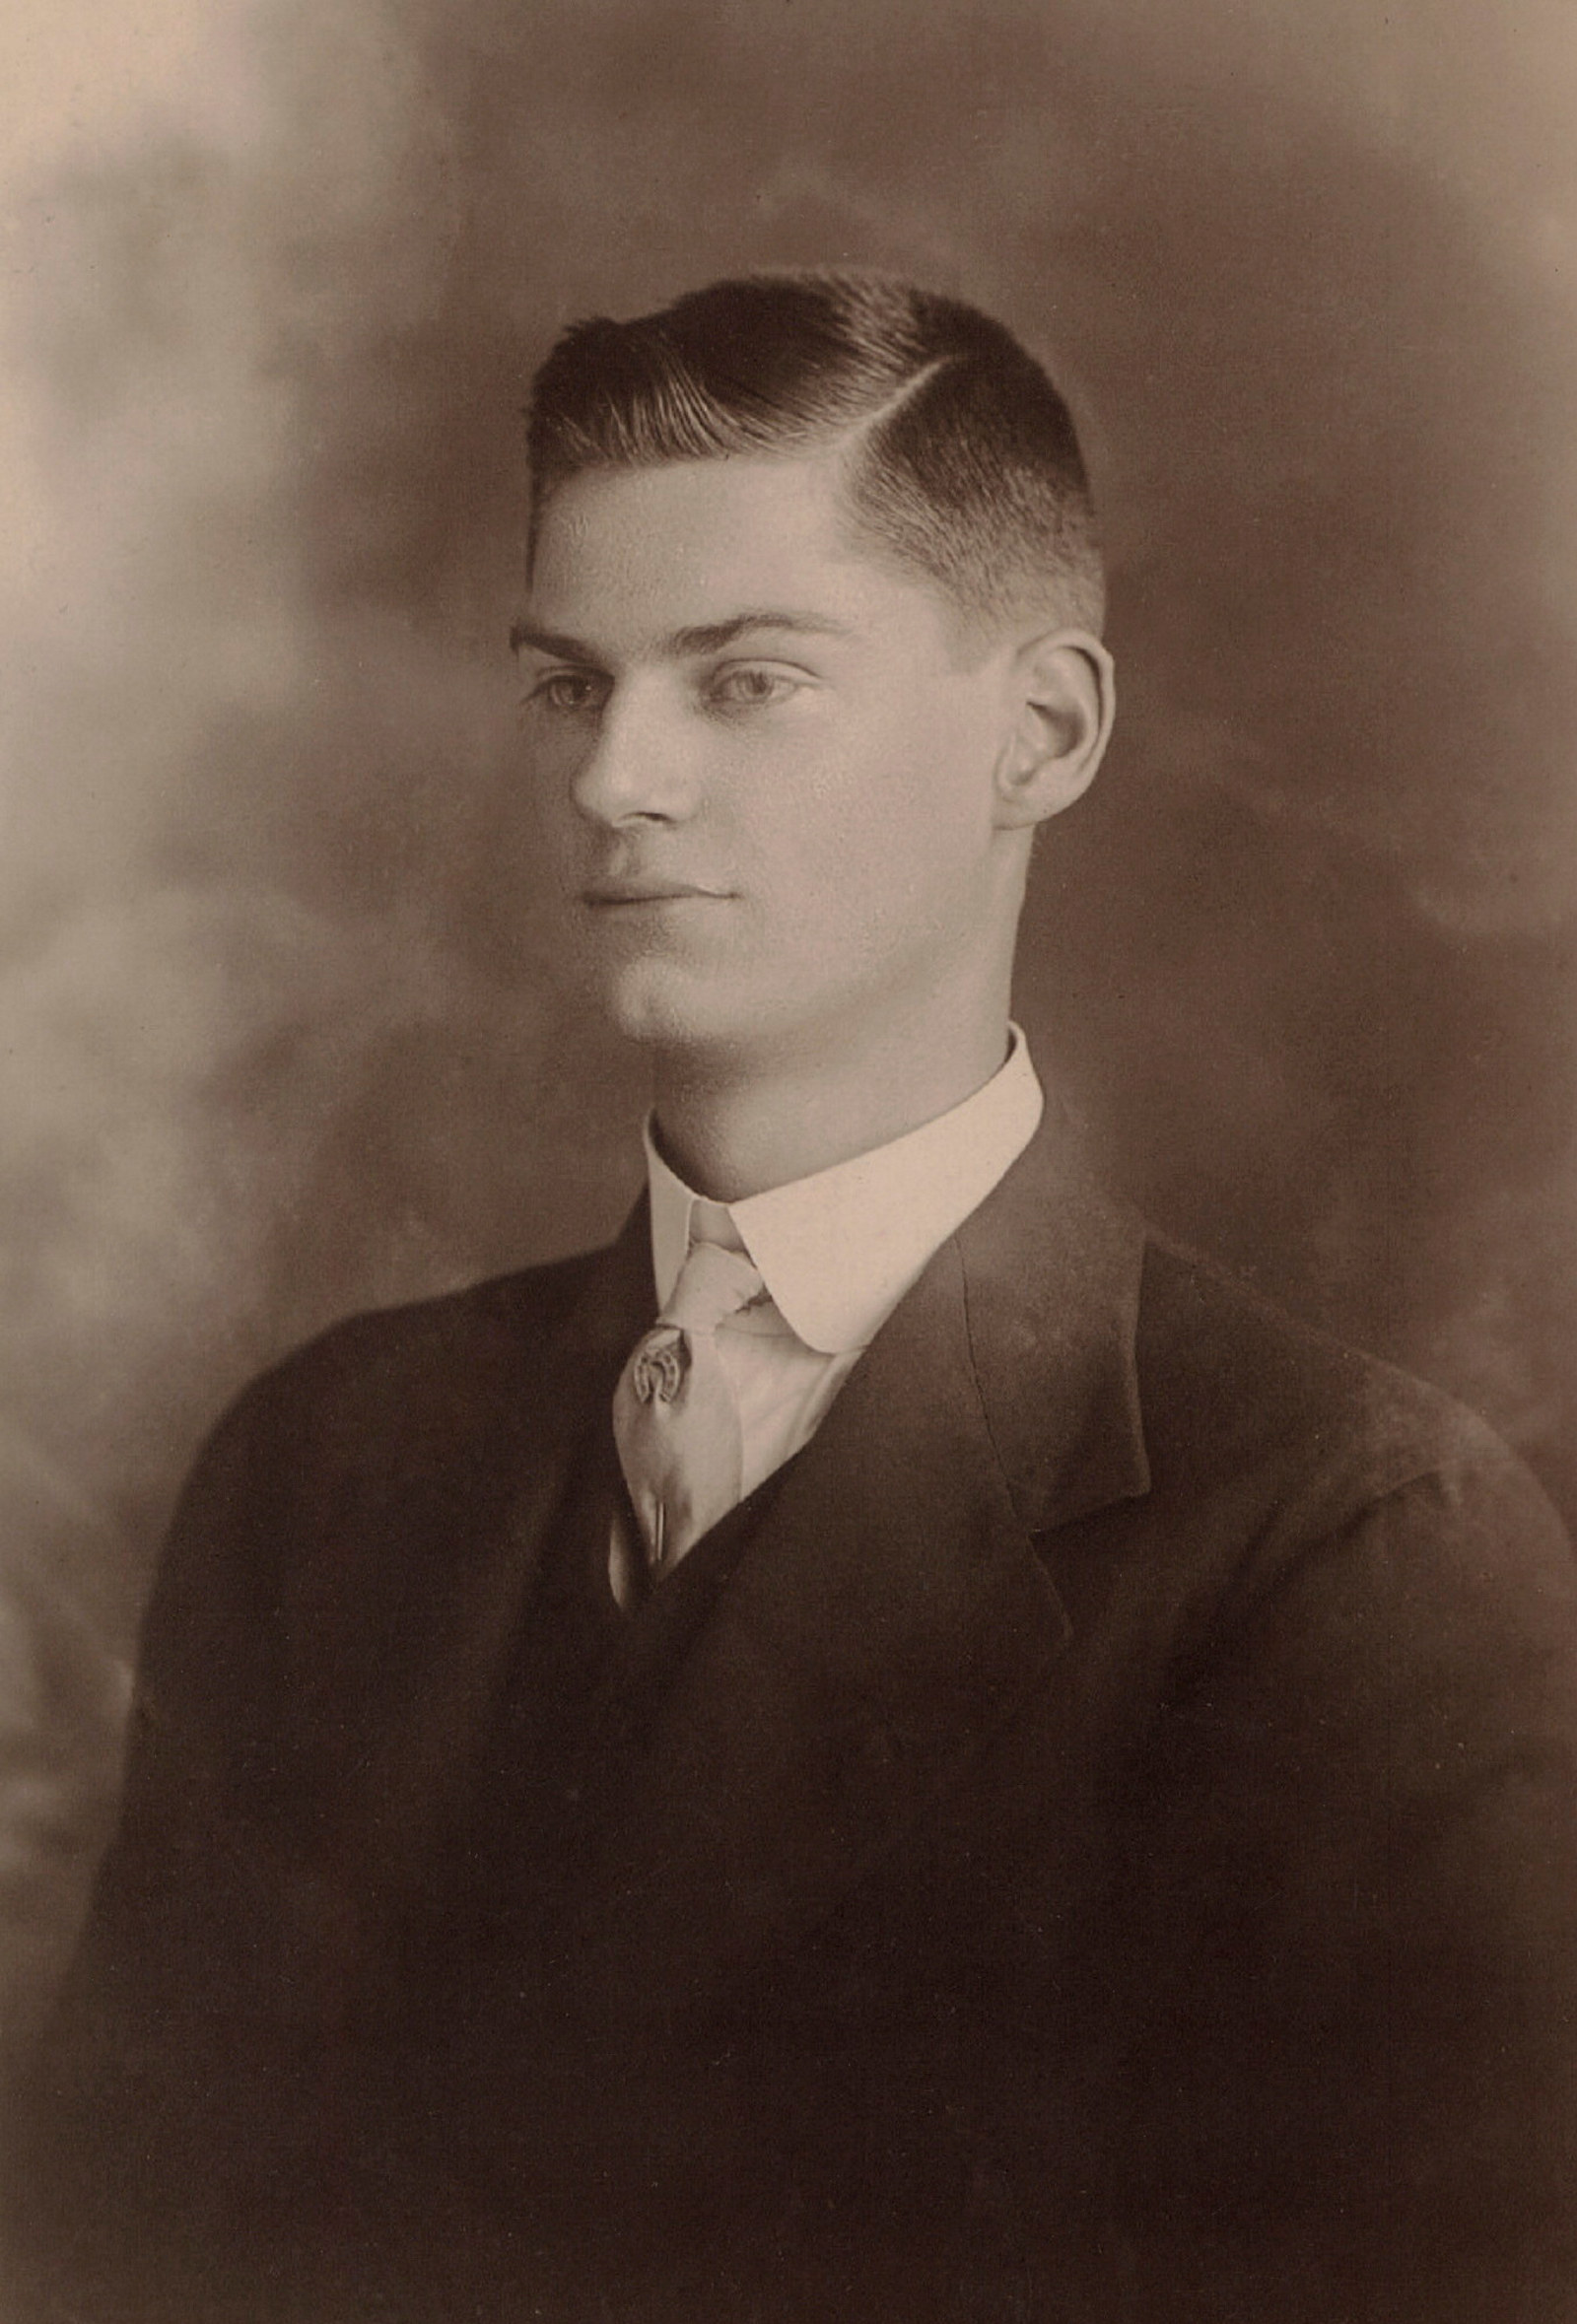 Black and white portrait photo of young man in suit.